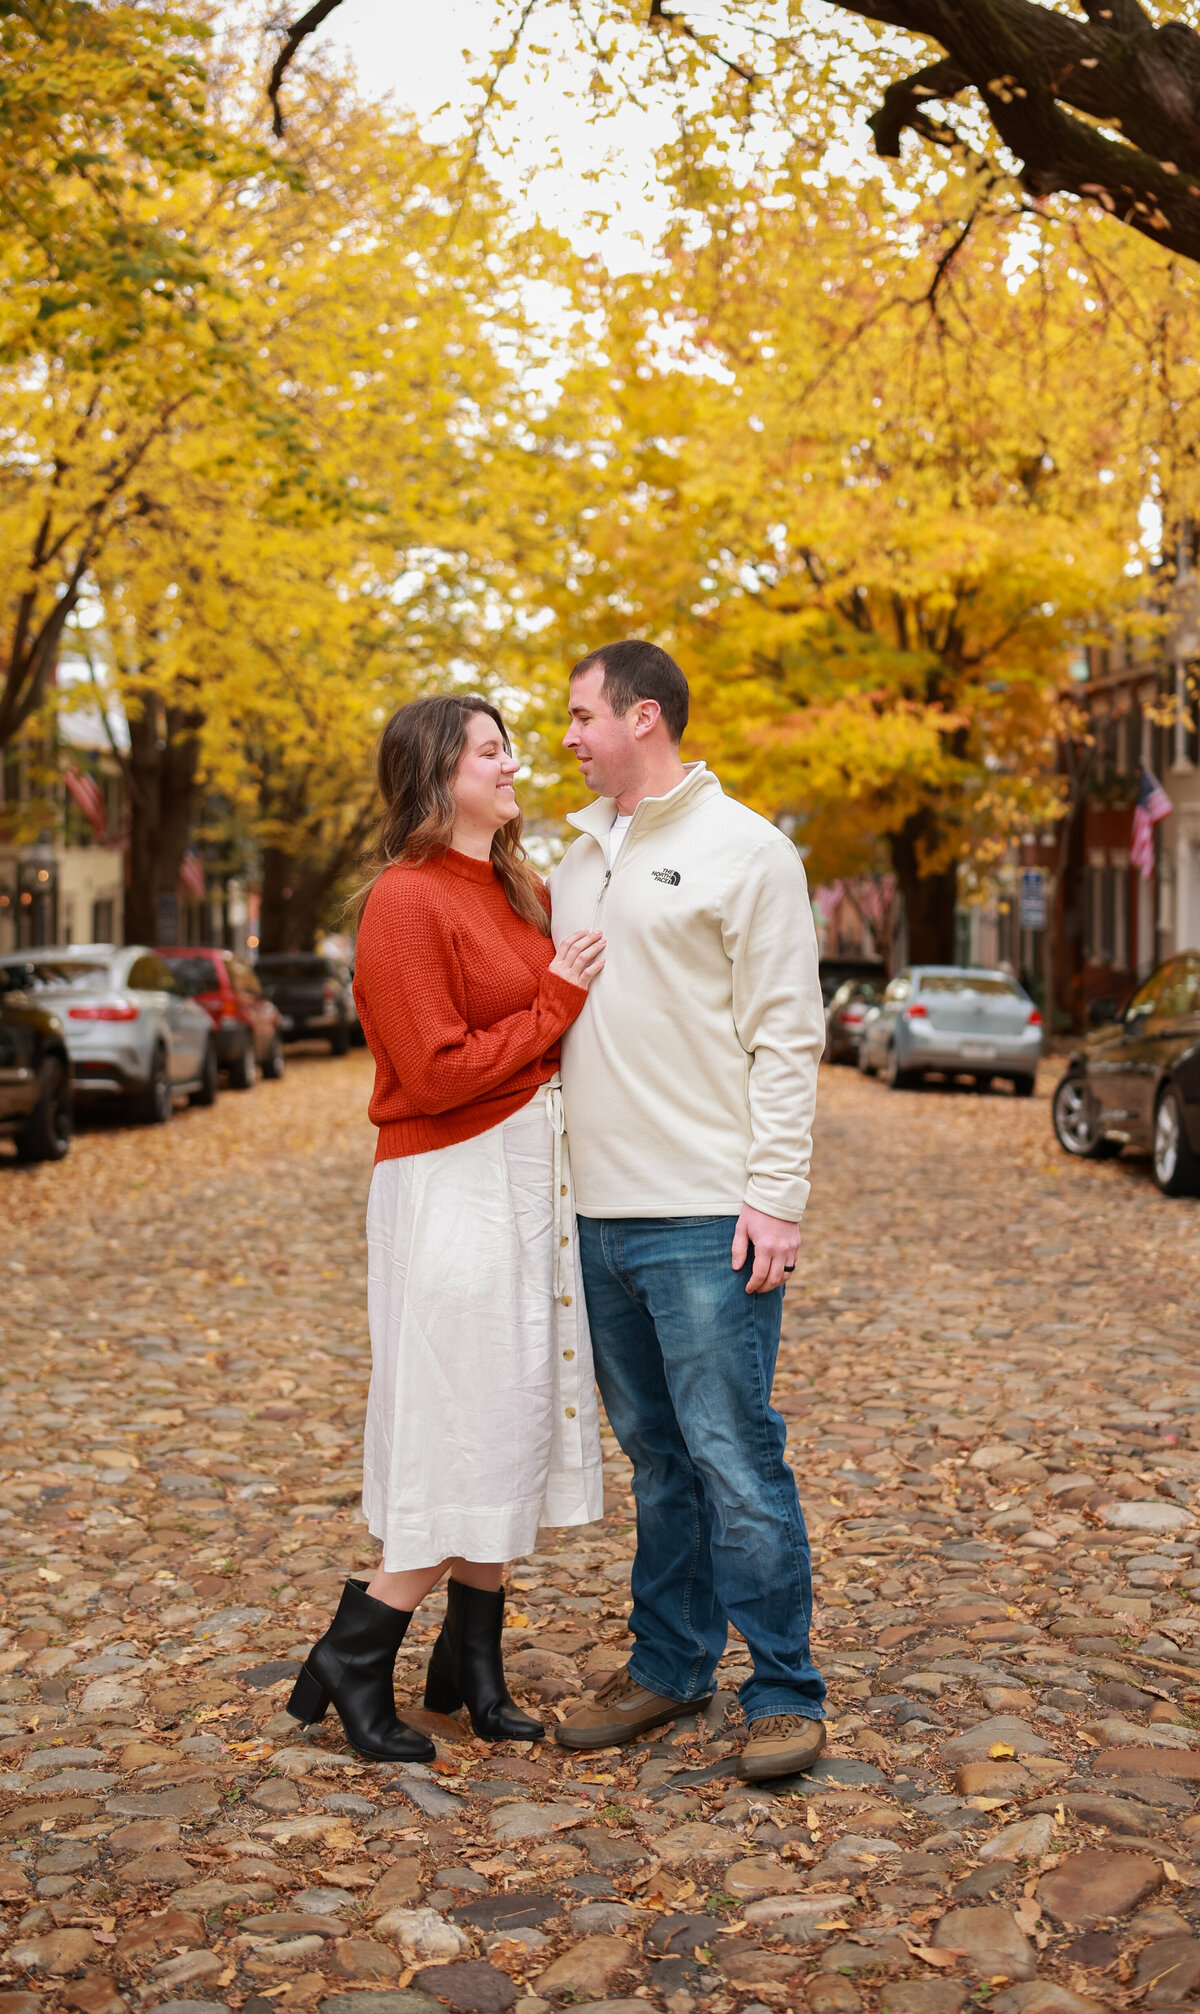 man and woman standing next to each other with yellow trees in the background and standing on pebble stones